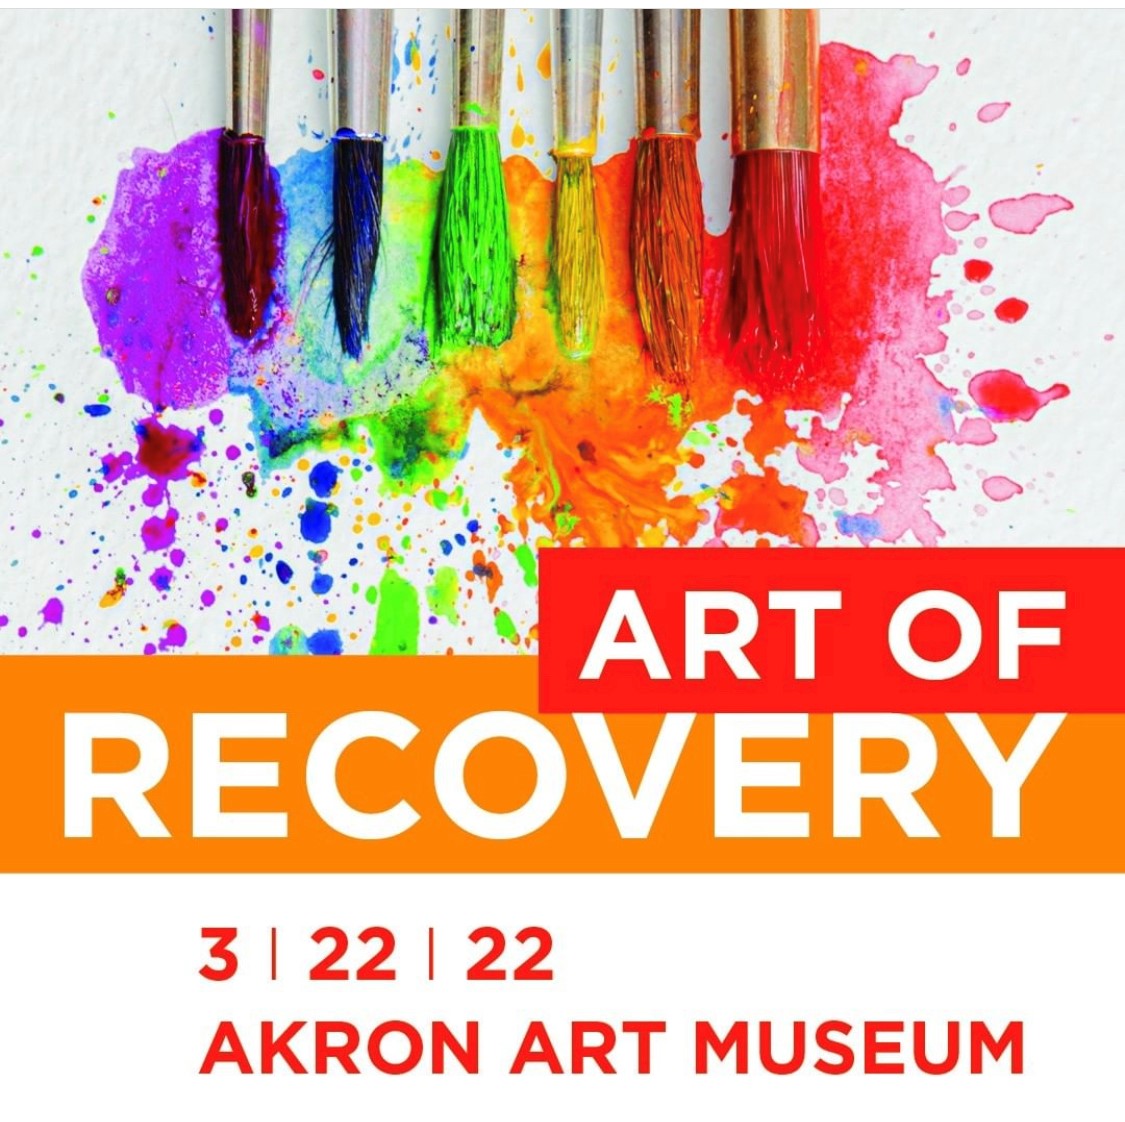 Smith Godios Sorensen Inc. Sponsors the 2022 CSS Art of Recovery Event